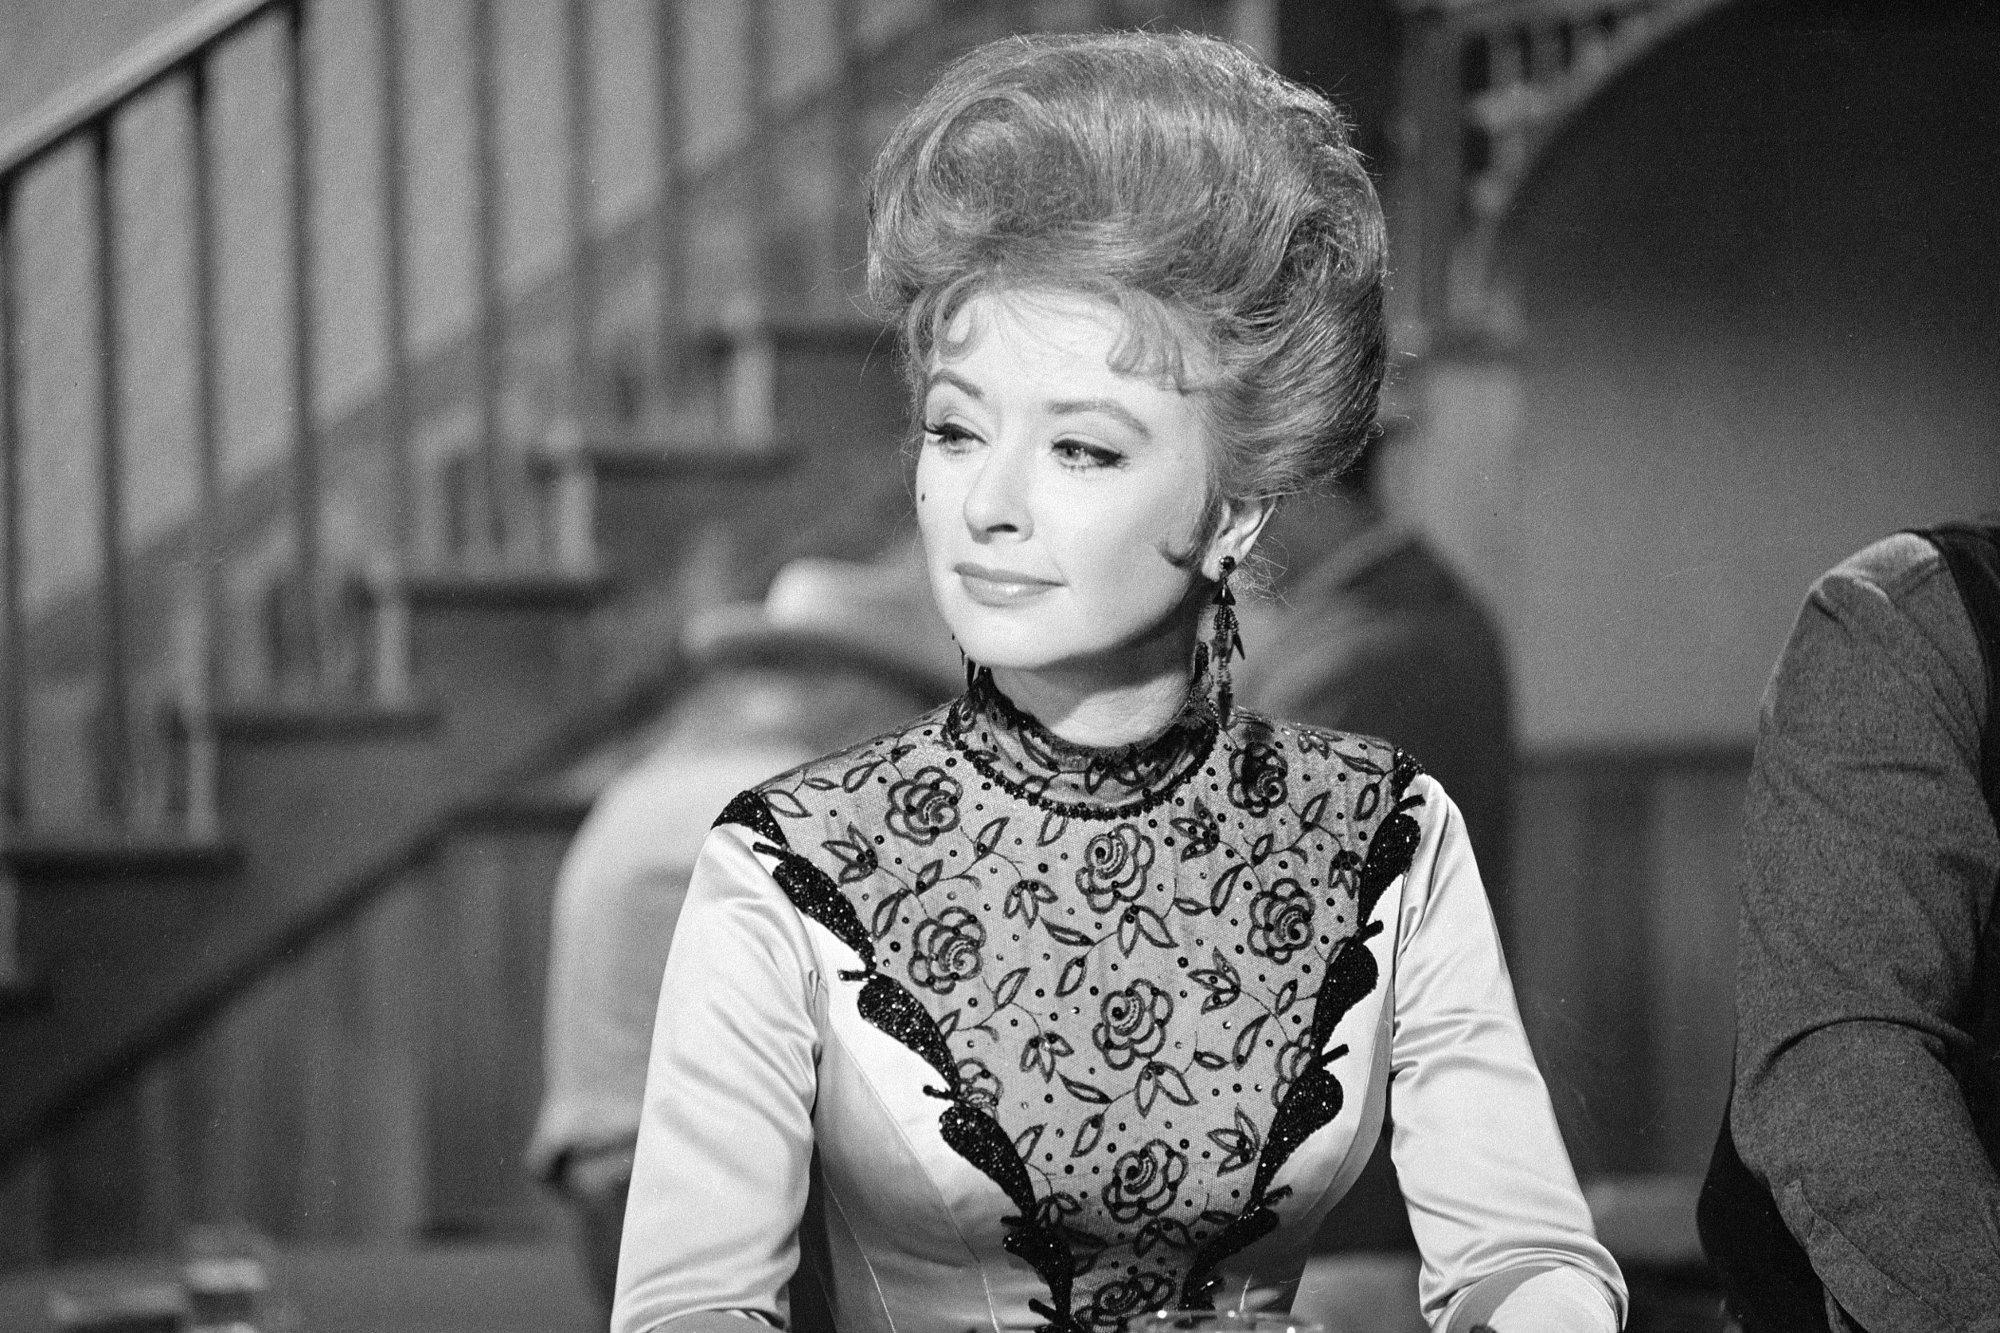 'Gunsmoke' Amanda Blake as Miss Kitty Russell in a black-and-white photo in front of a staircase